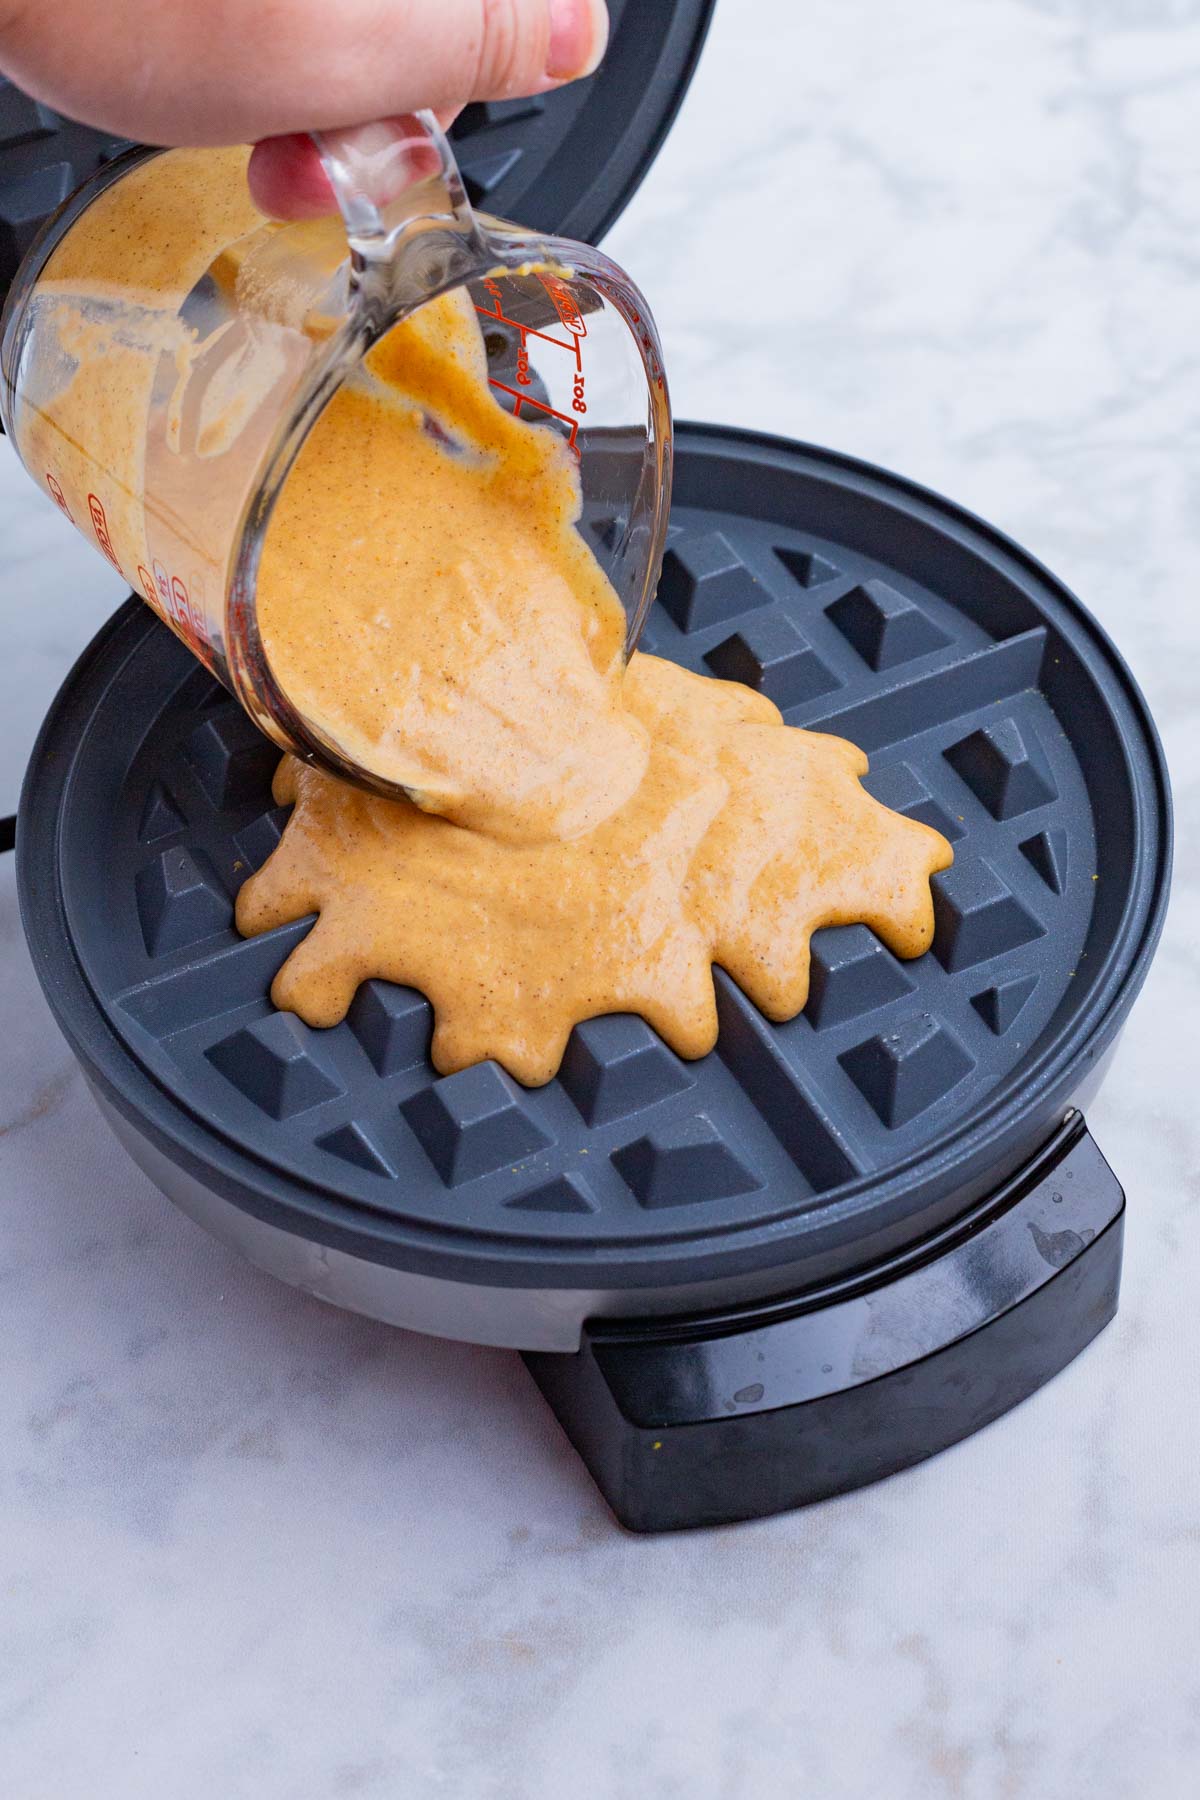 The pumpkin waffle batter is poured into a waffle iron.